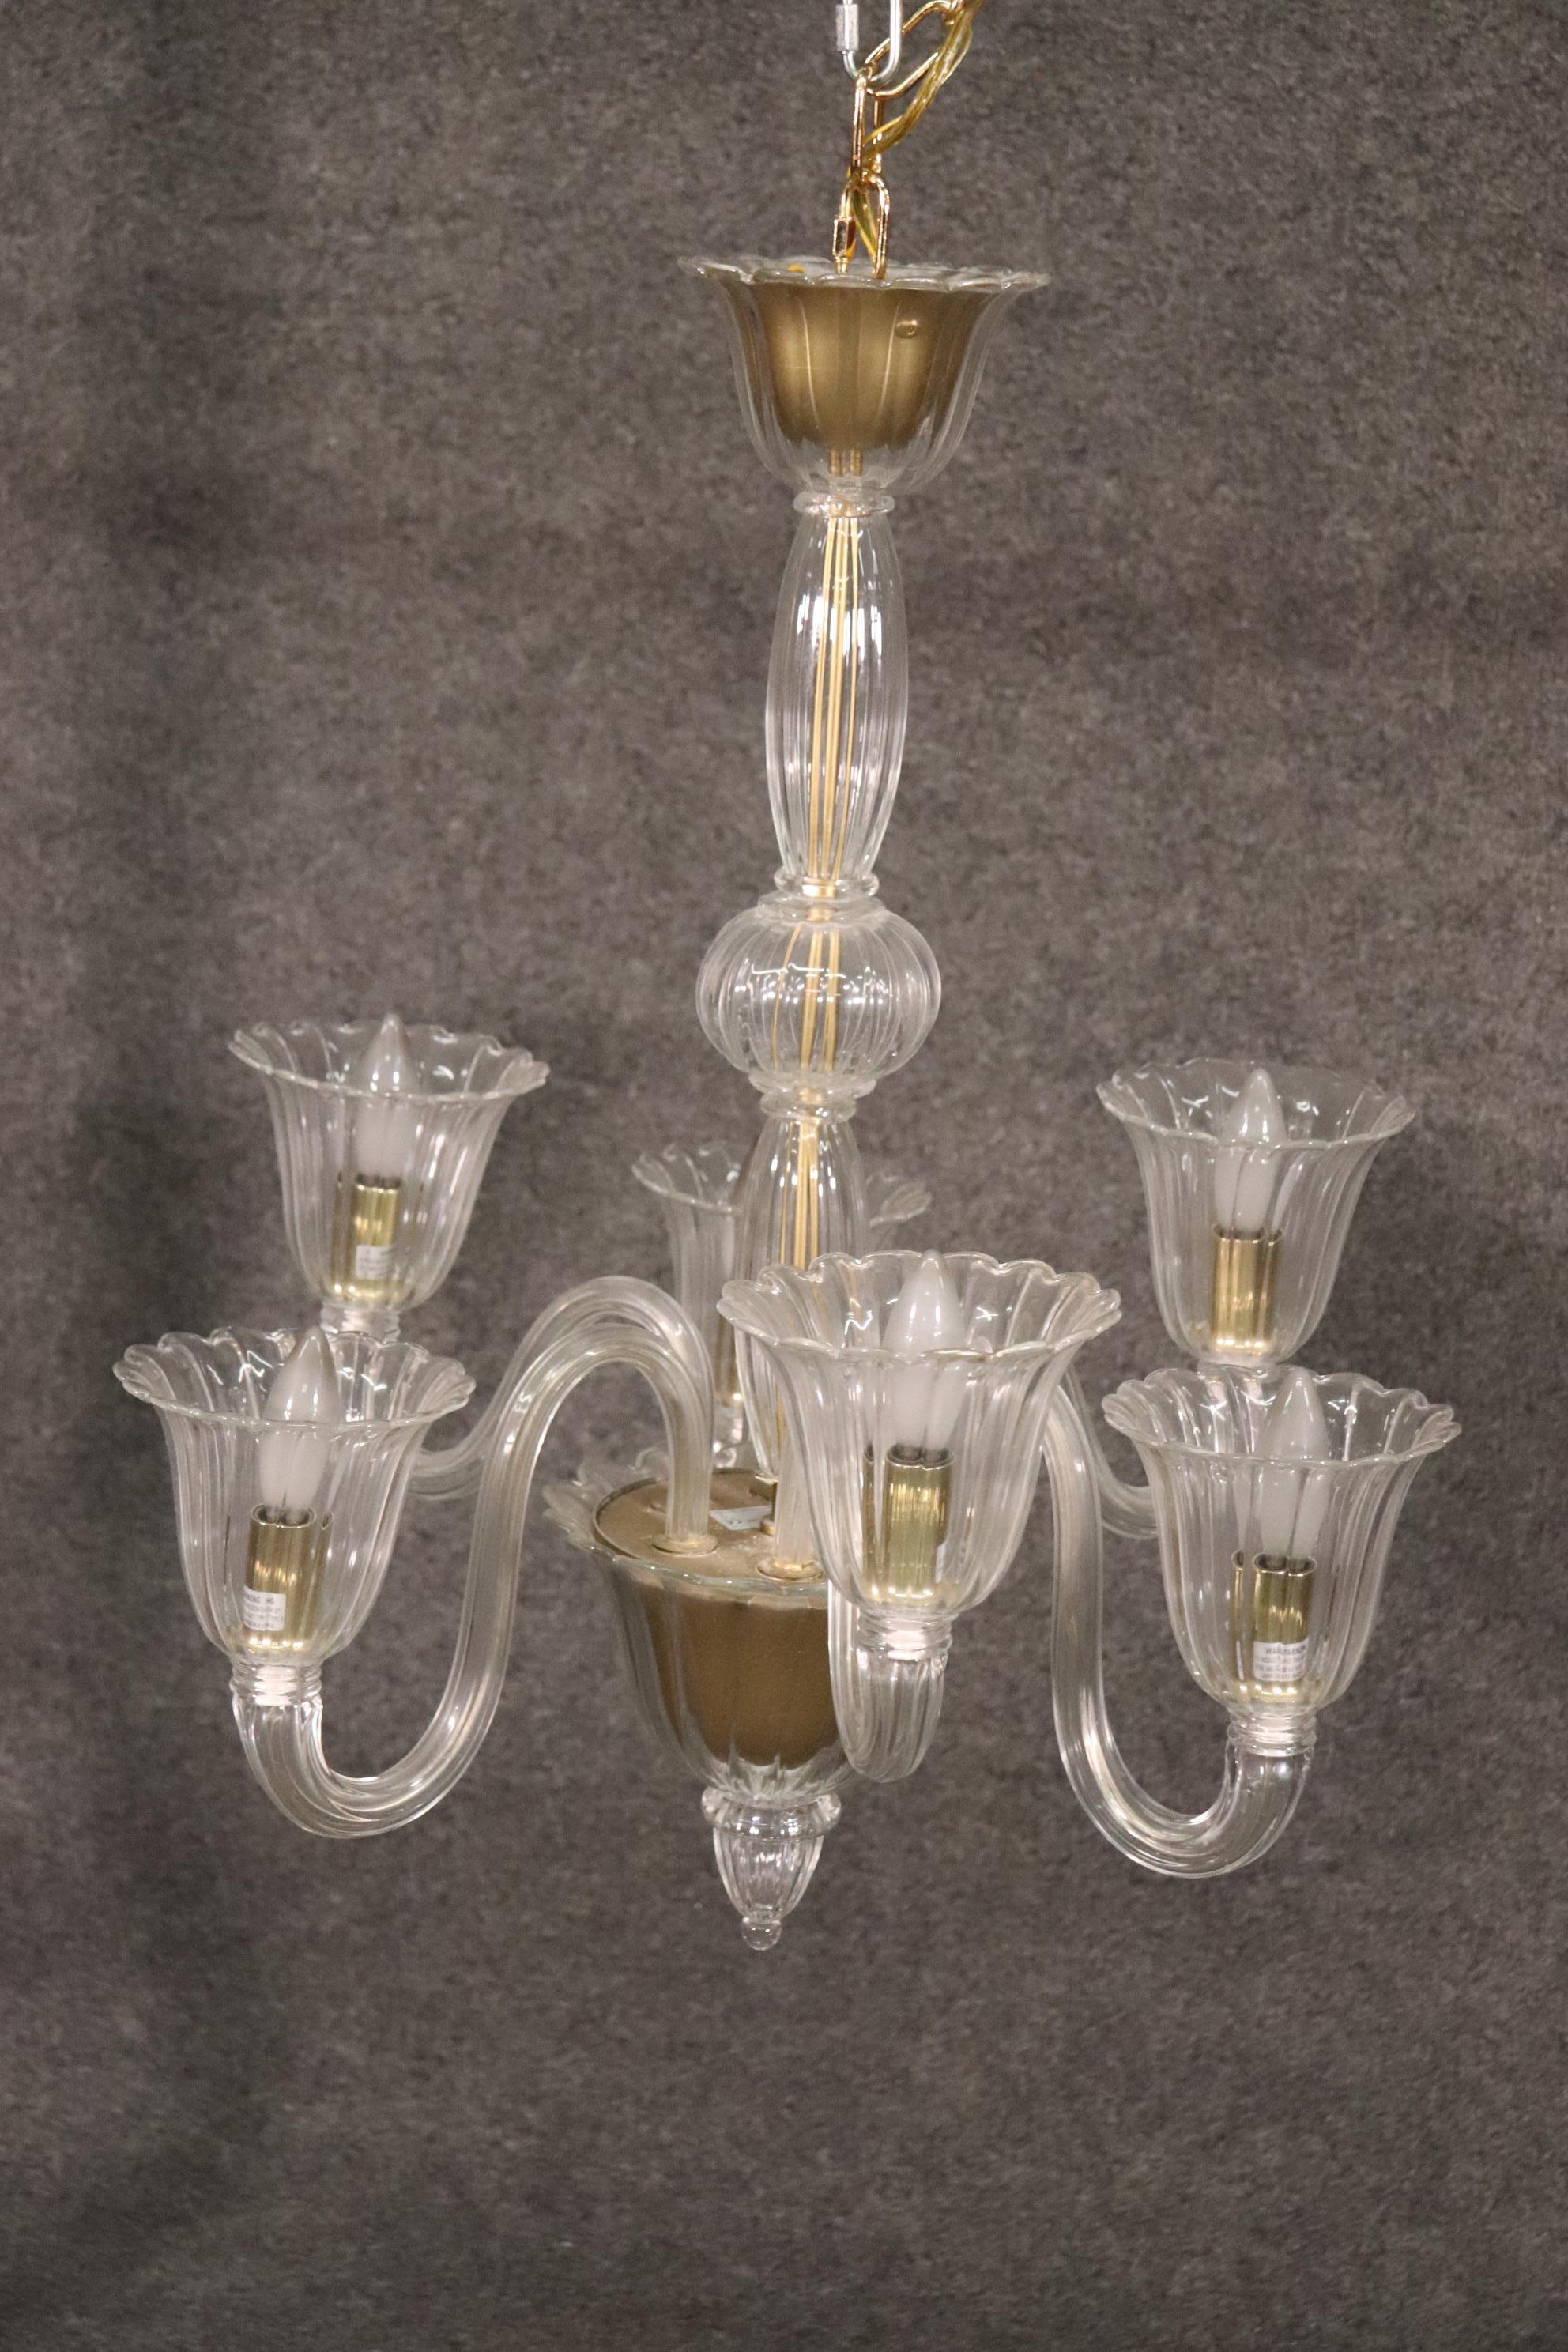 This is a beautiful 6-arm chandelier made in Italy of Murano glass. The chandelier measures 23 x 23 x 28 tall and will require rewiring since it is Italian. The chandelier dates to the 1950s.